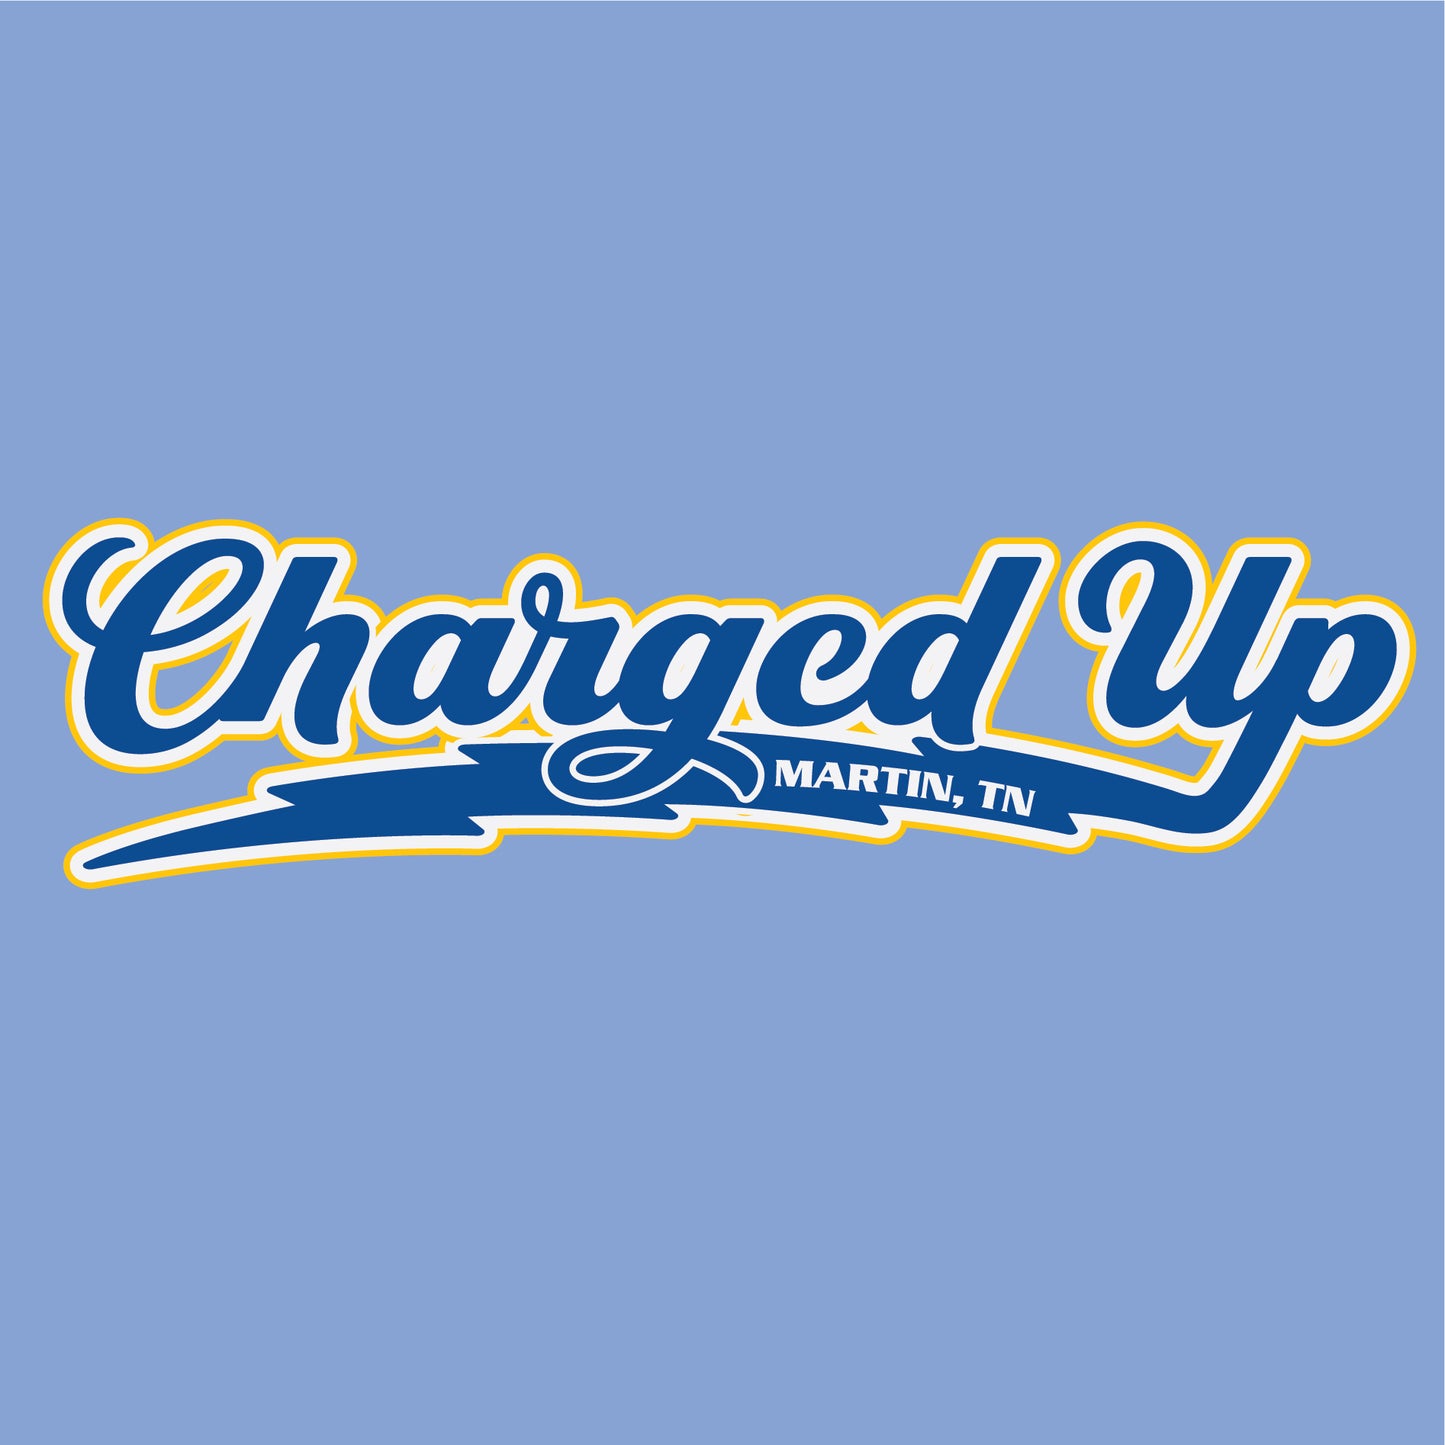 Charged Up Youth T-shirt